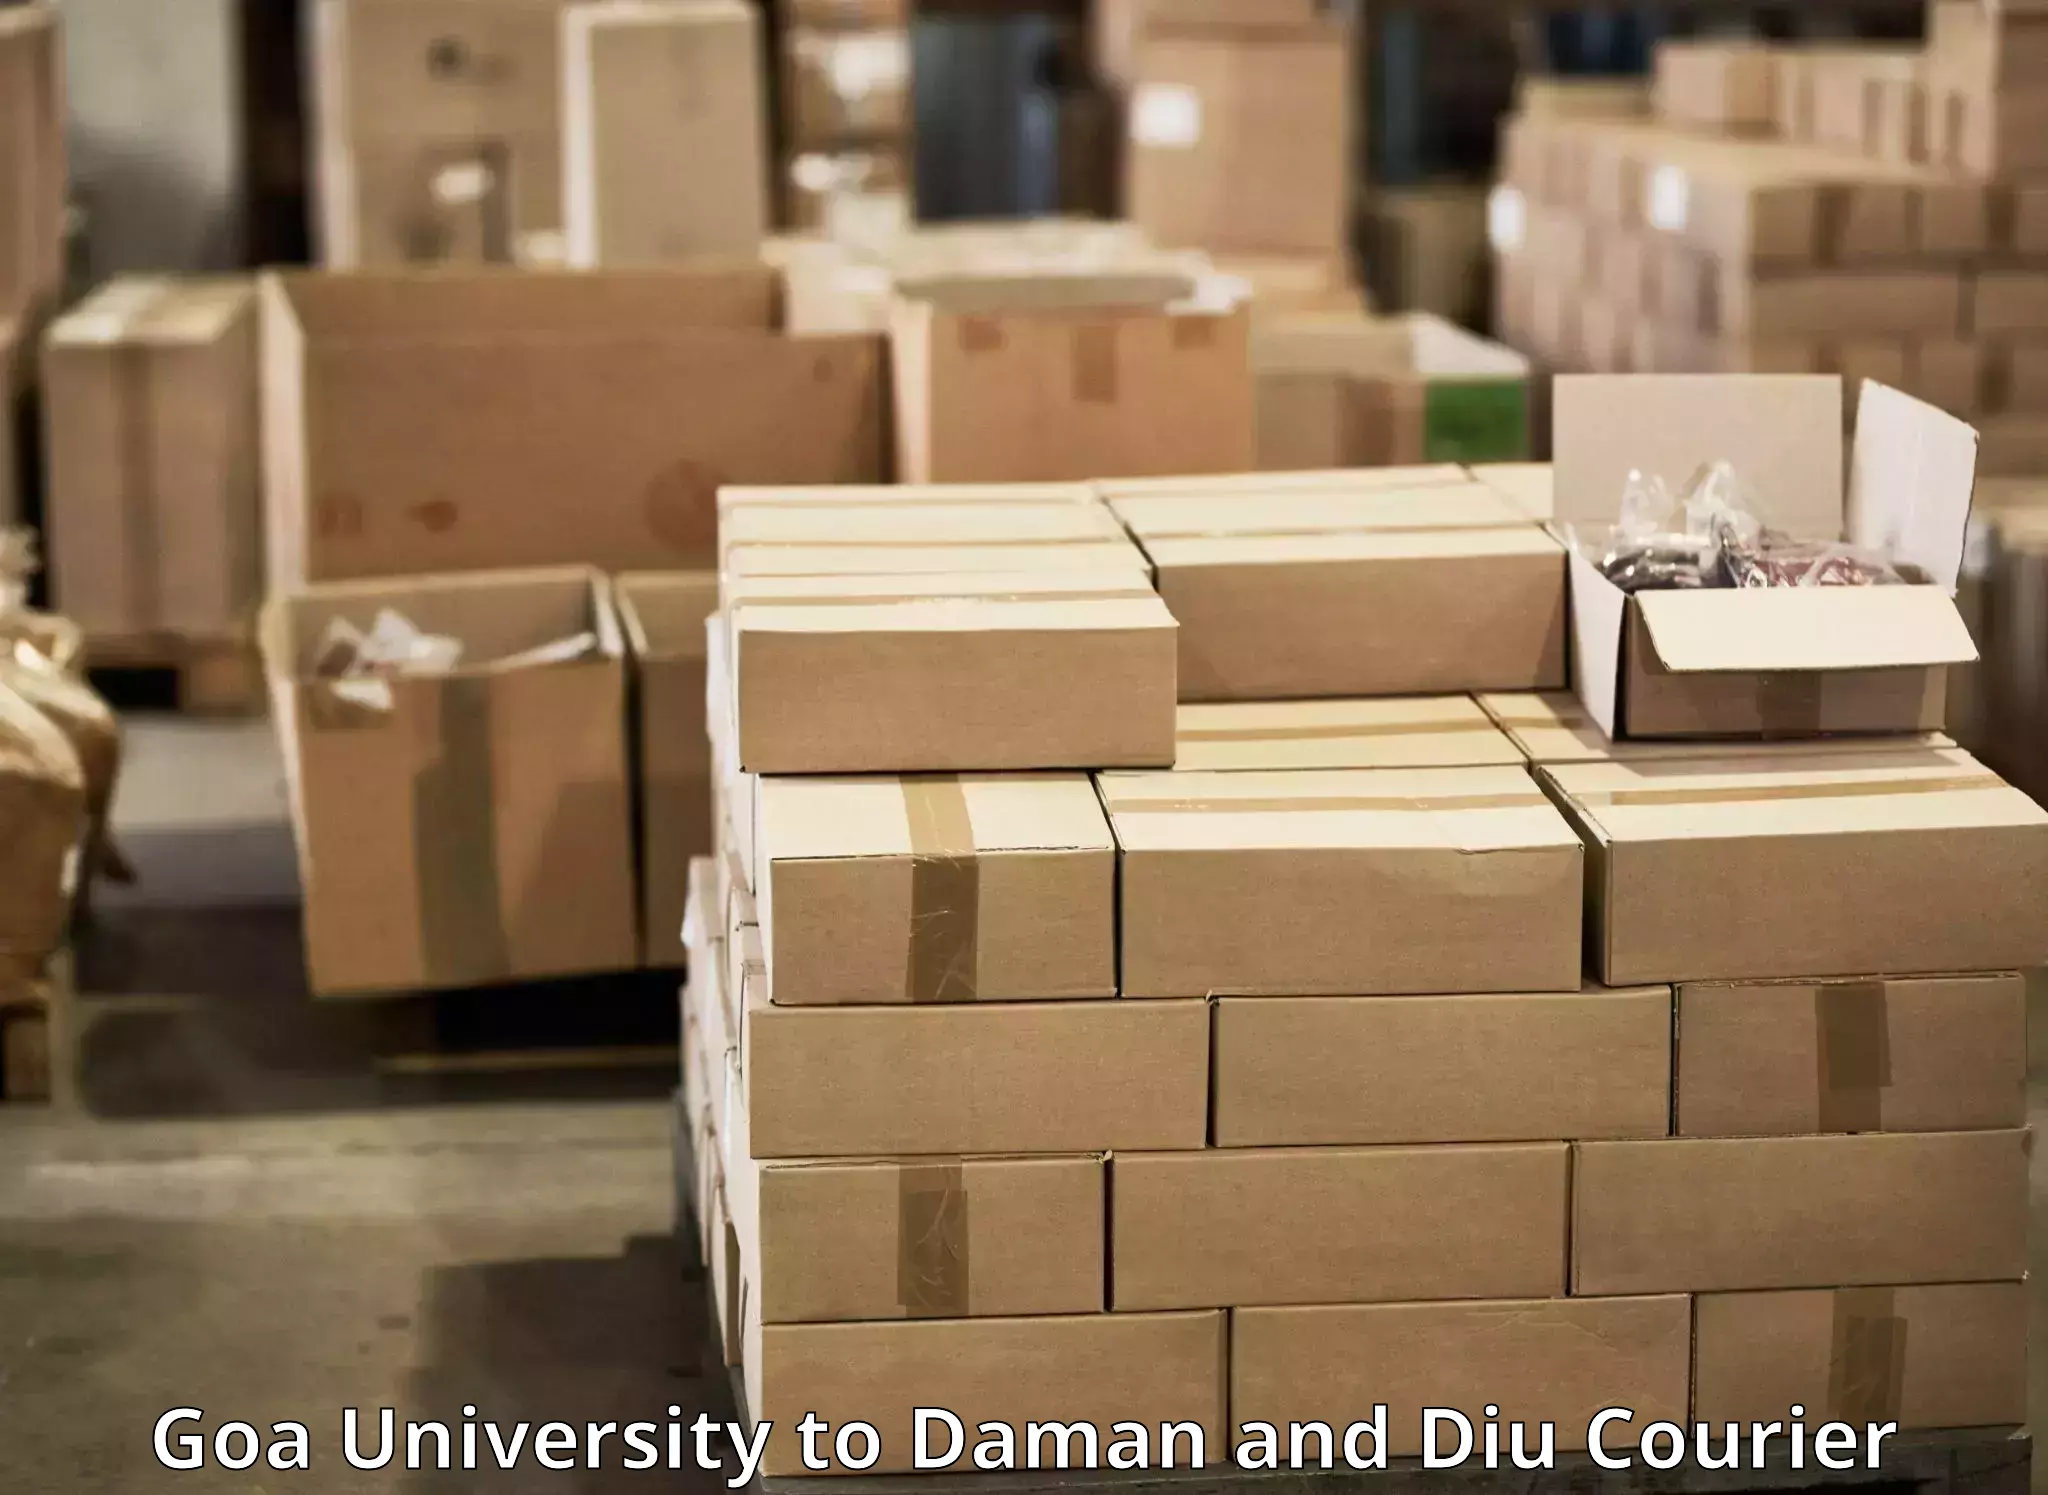 Fast-track shipping solutions Goa University to Daman